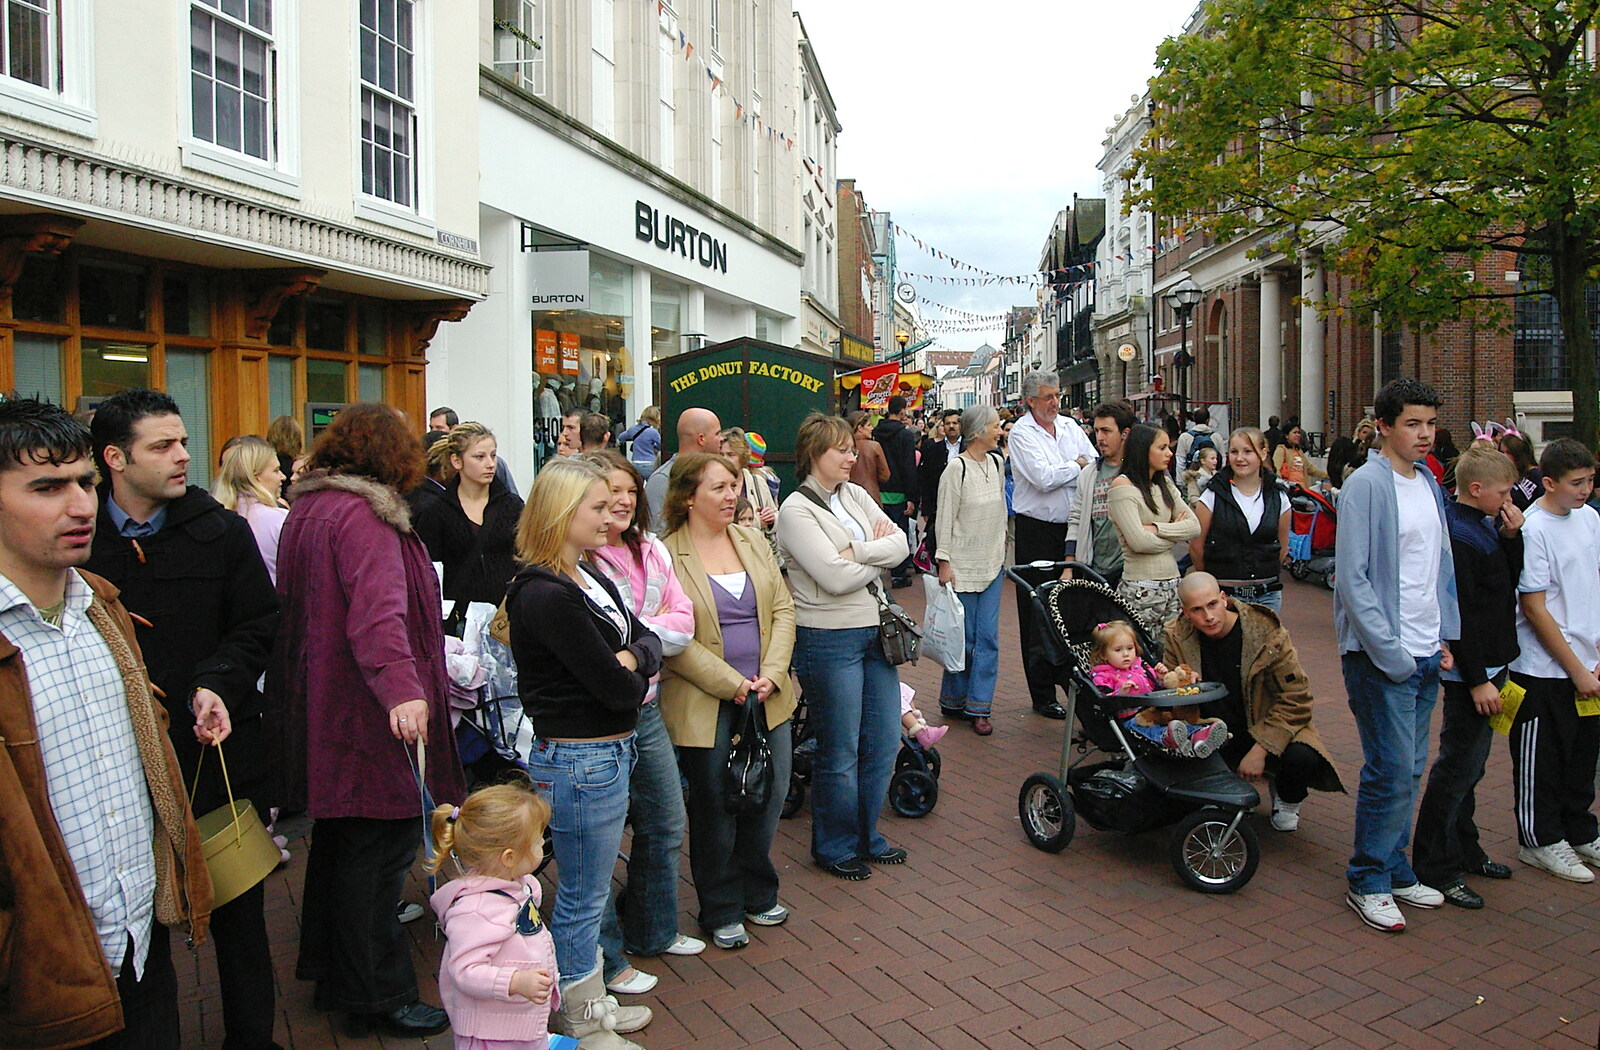 Suffolk County Council Dereliction, and Cotton Flamenco, Suffolk - 22nd October 2005: Crowds outside Burton in Ipswich